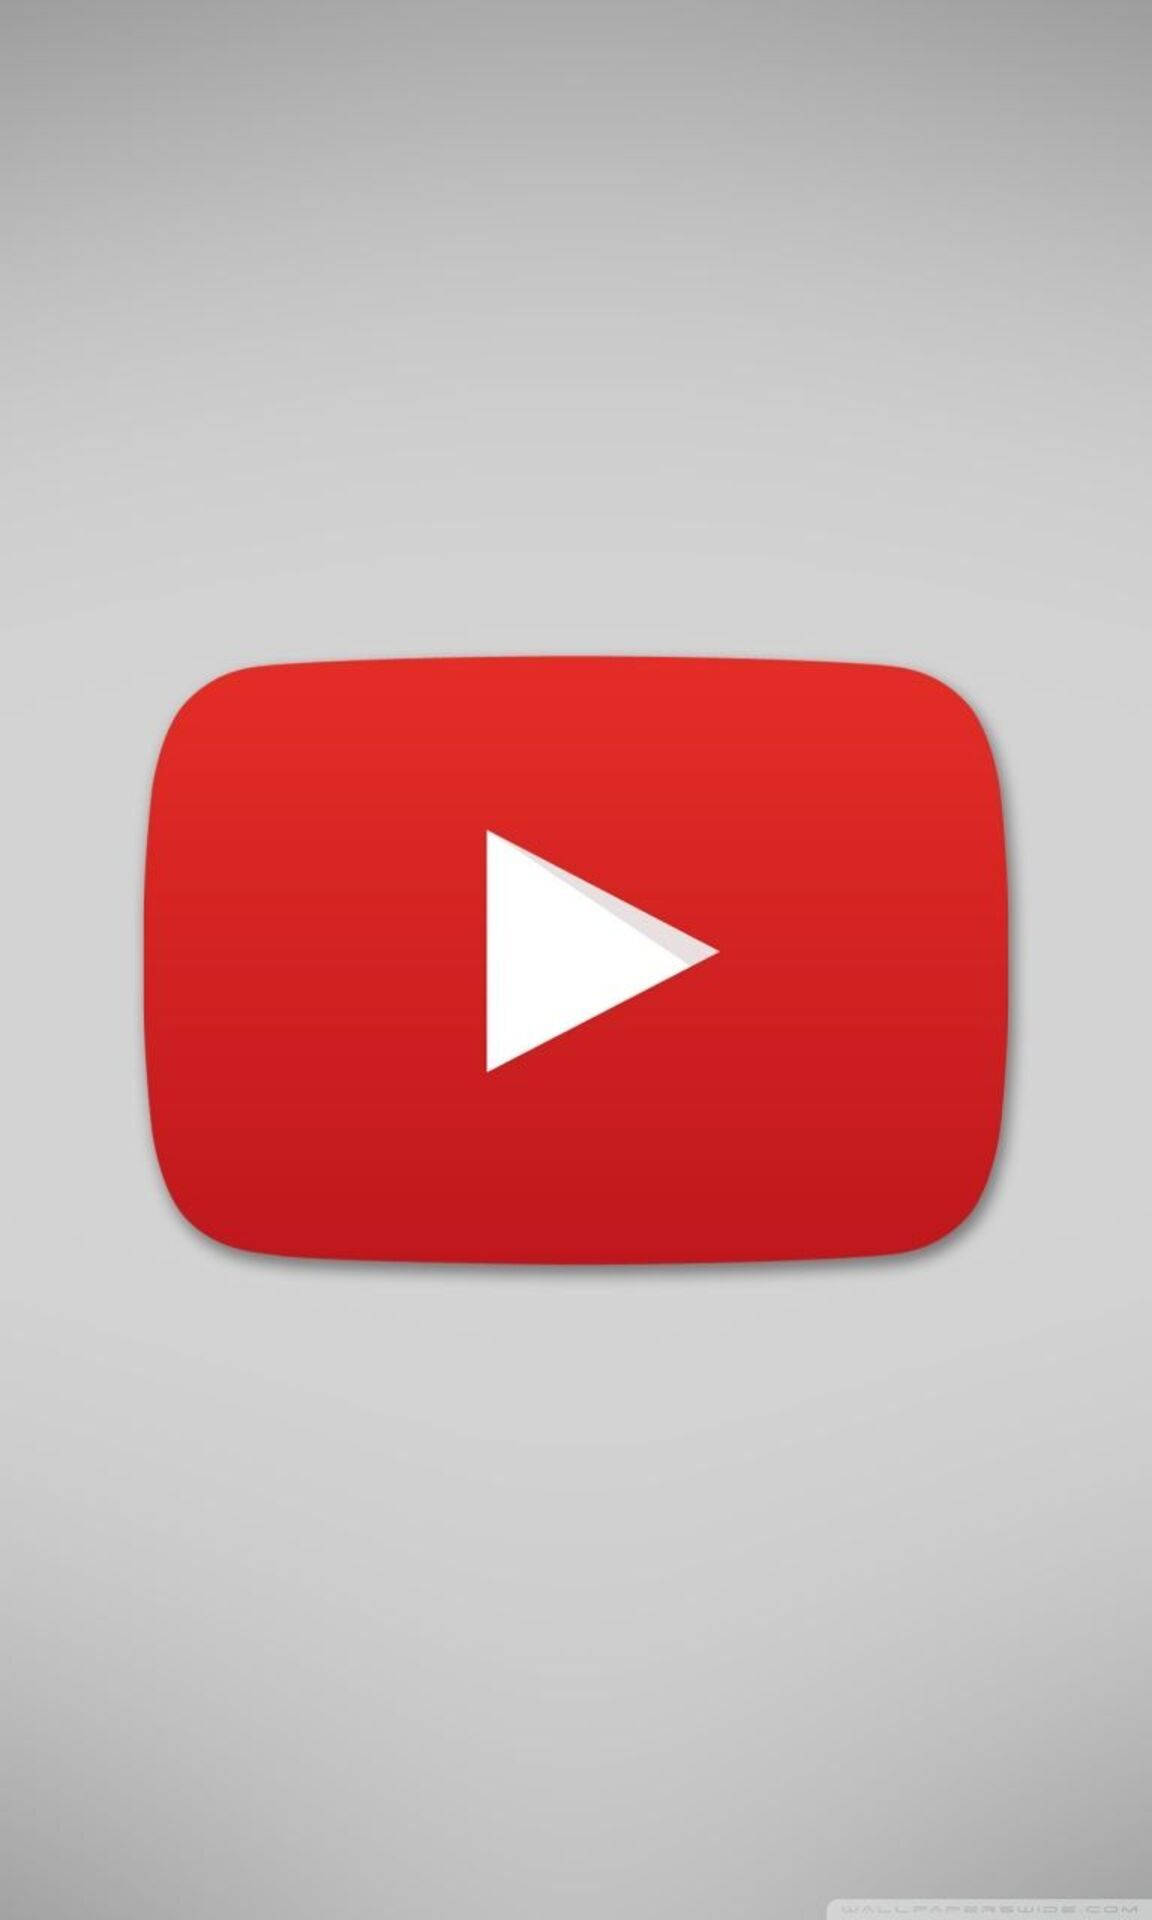 Download Animated Youtube Play Button Wallpaper